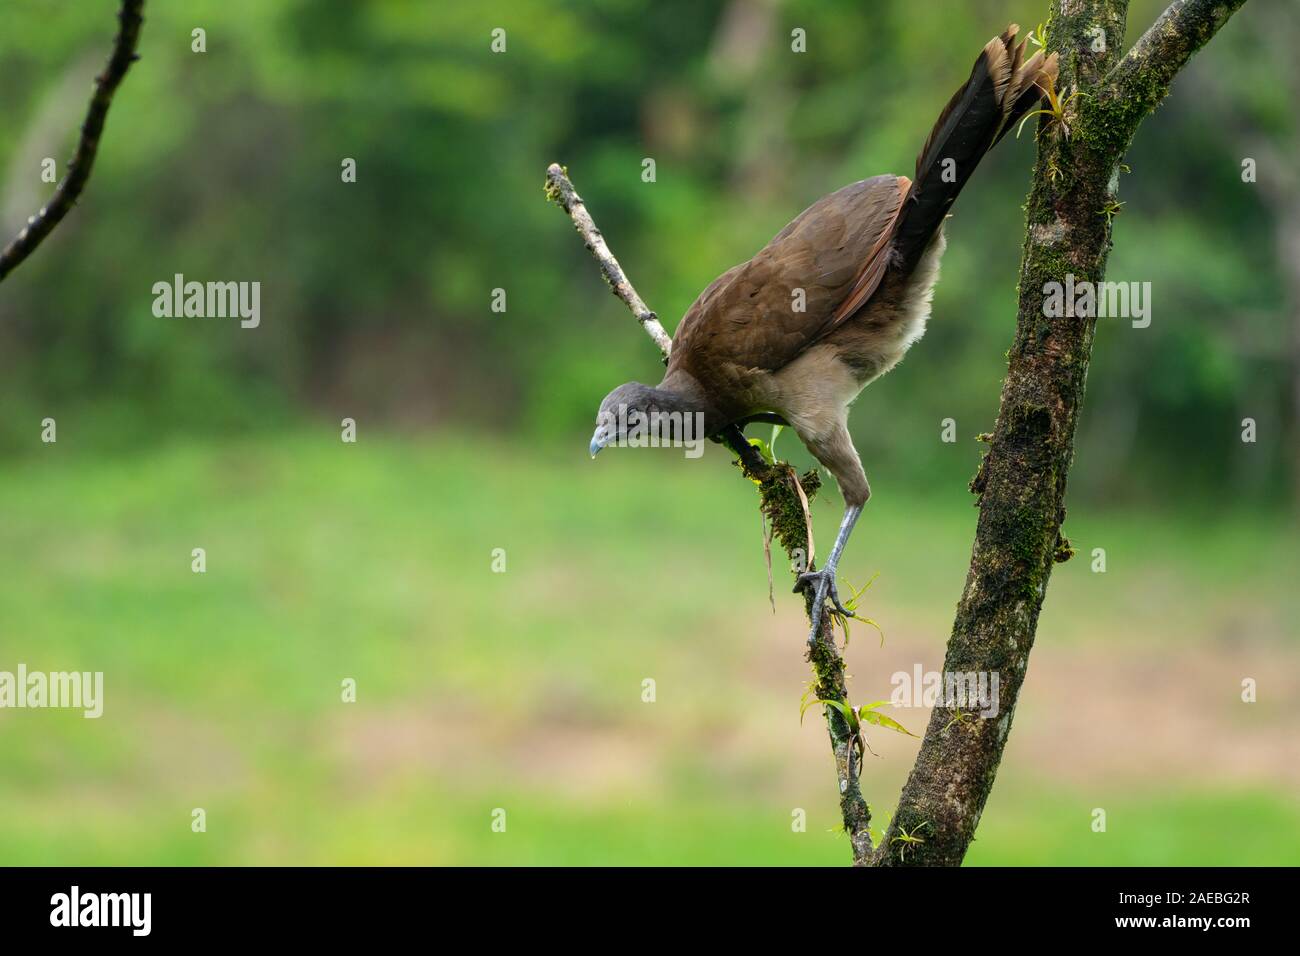 grey-headed chachalaca (Ortalis cinereiceps)  an arboreal species, found in rainforests. Photographed in the Costa Rican rainforest Stock Photo